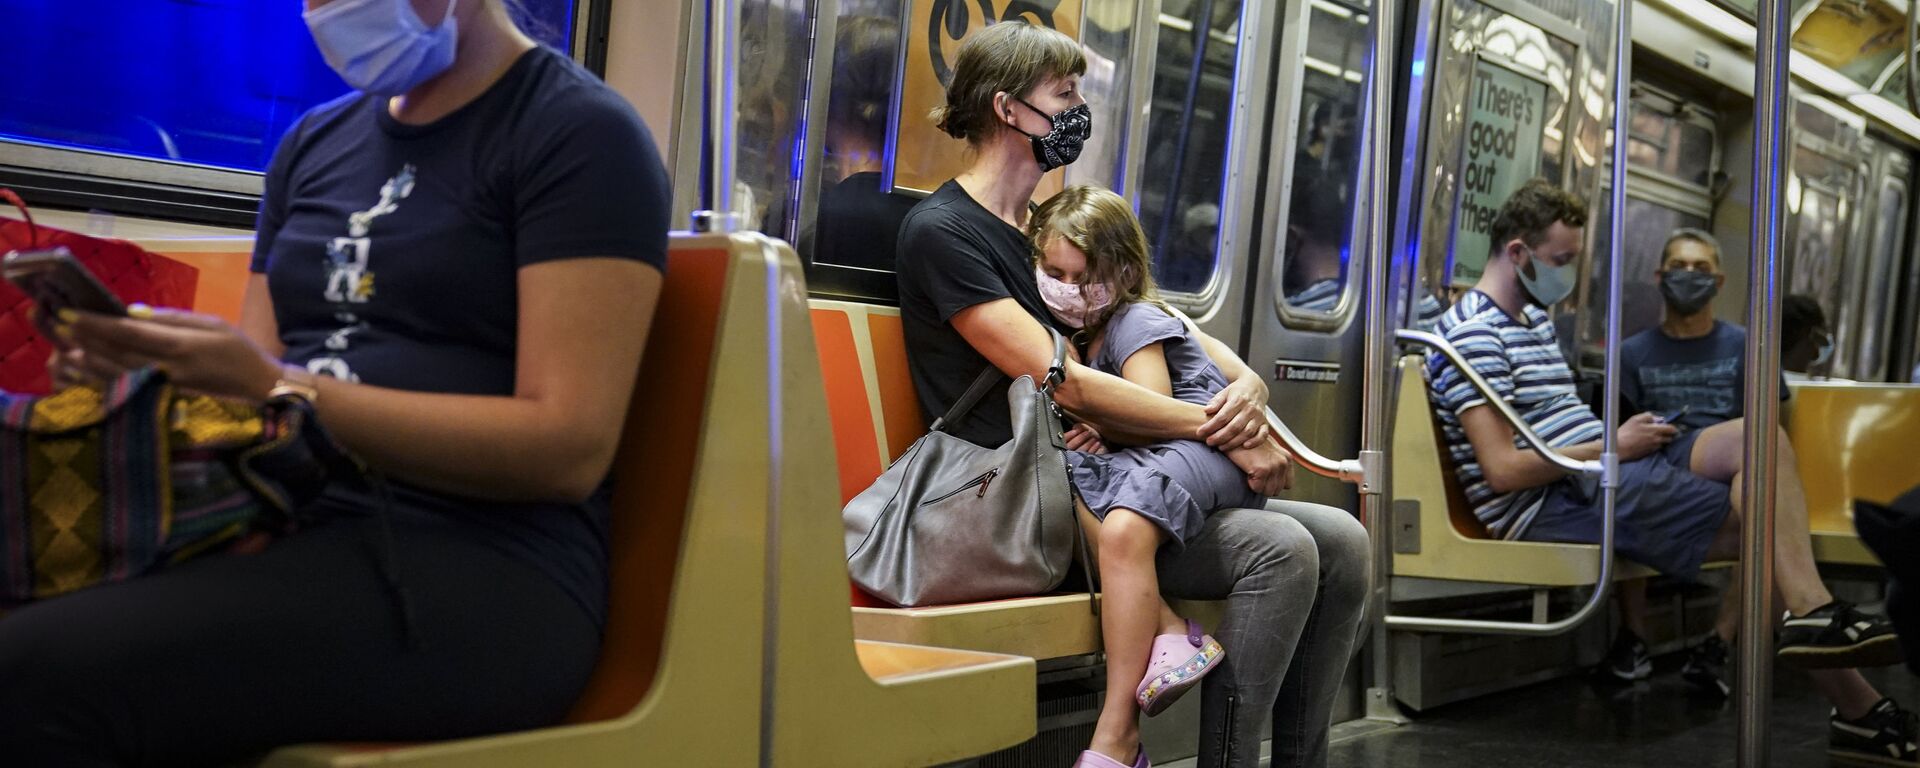 A child rests on a subway car while riders wear protective masks due to COVID-19 concerns, Monday, Aug. 17, 2020, in New York. - Sputnik International, 1920, 04.05.2022